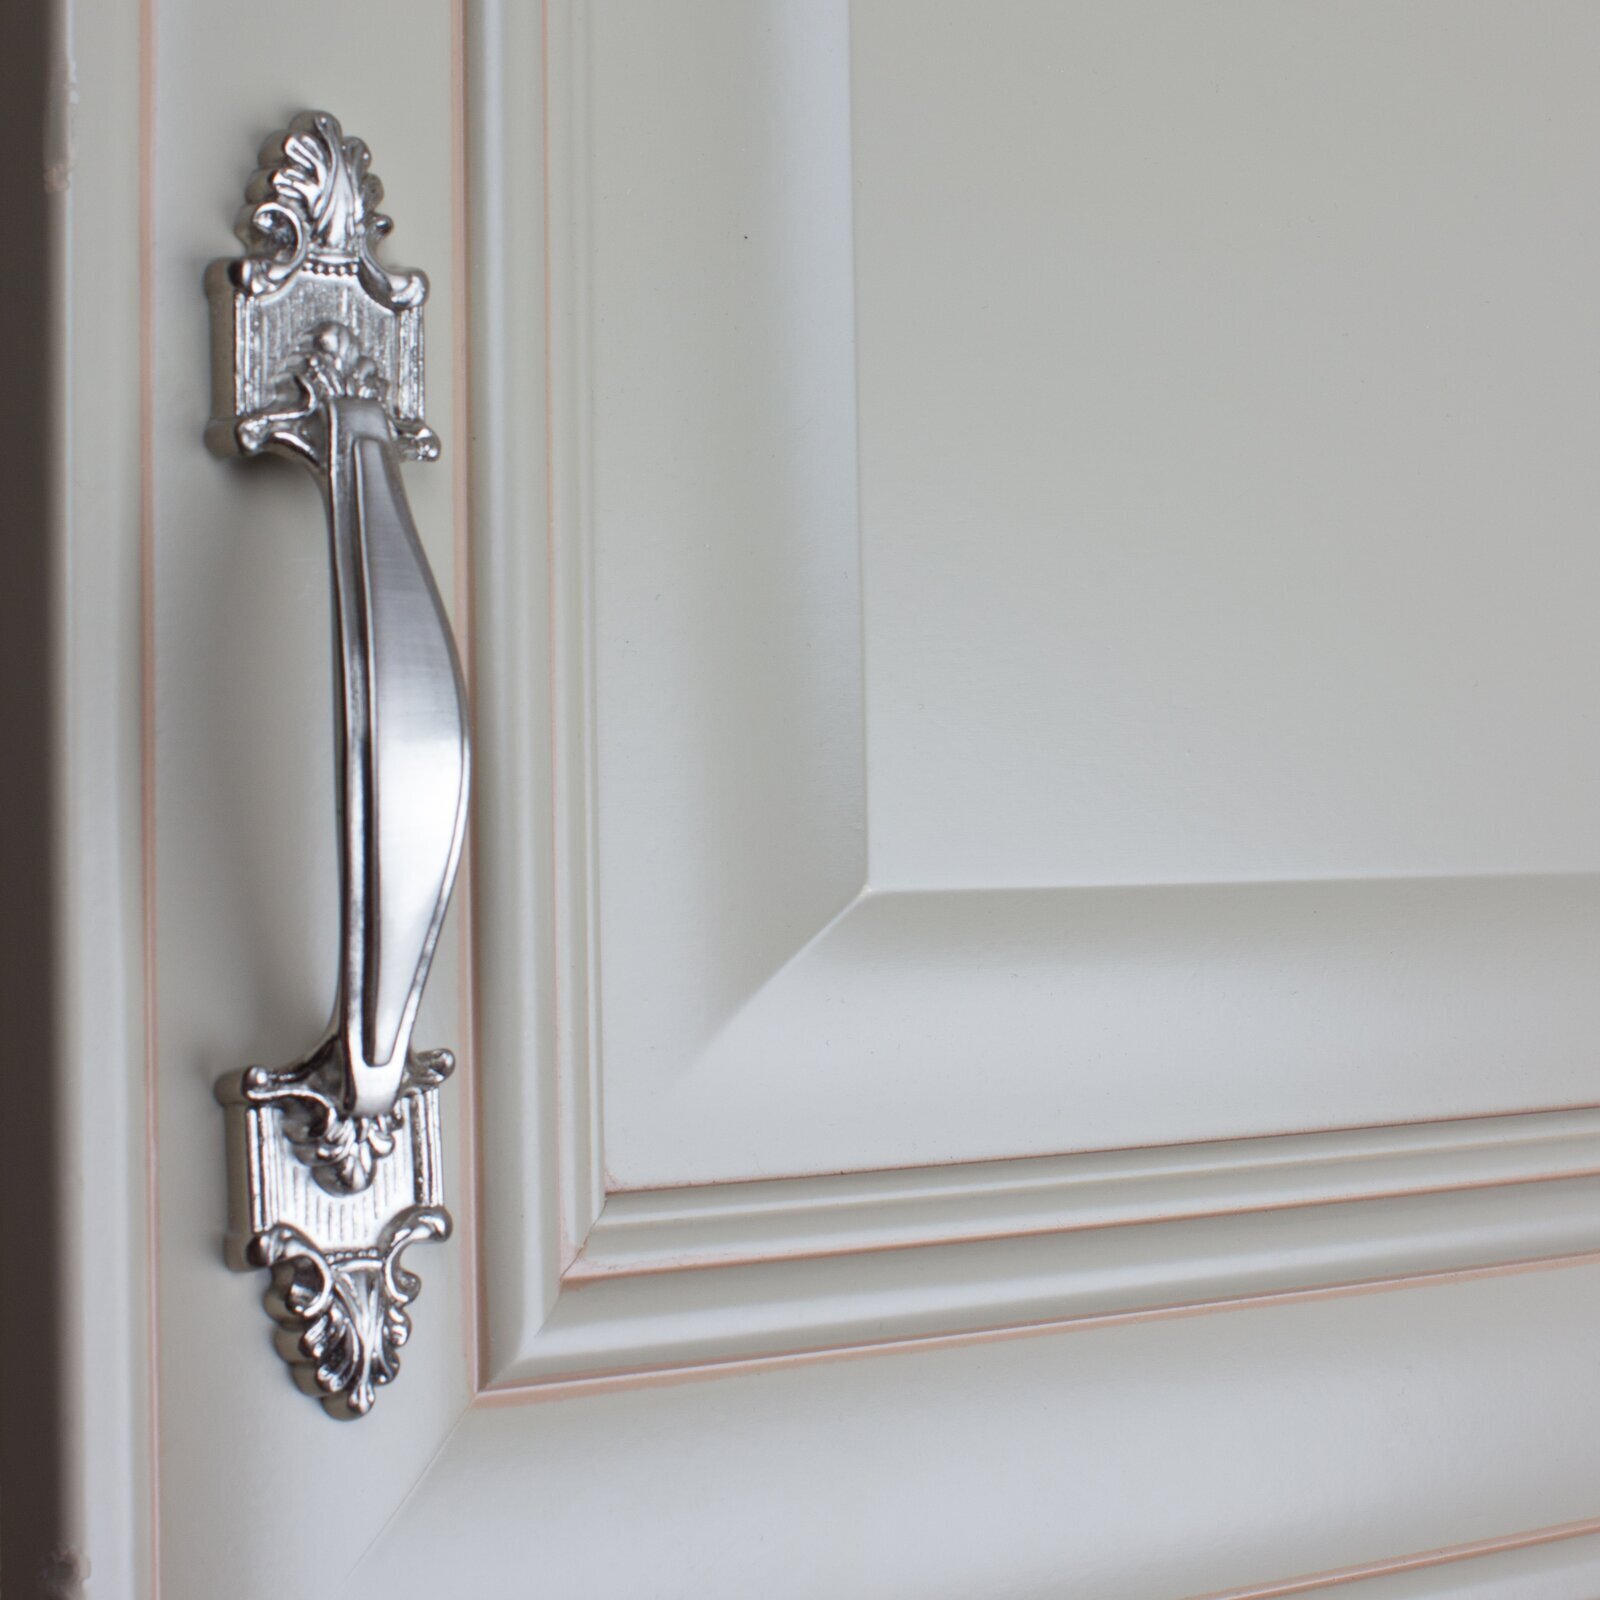 Ornate Dresser Handles with Arch Pull Design